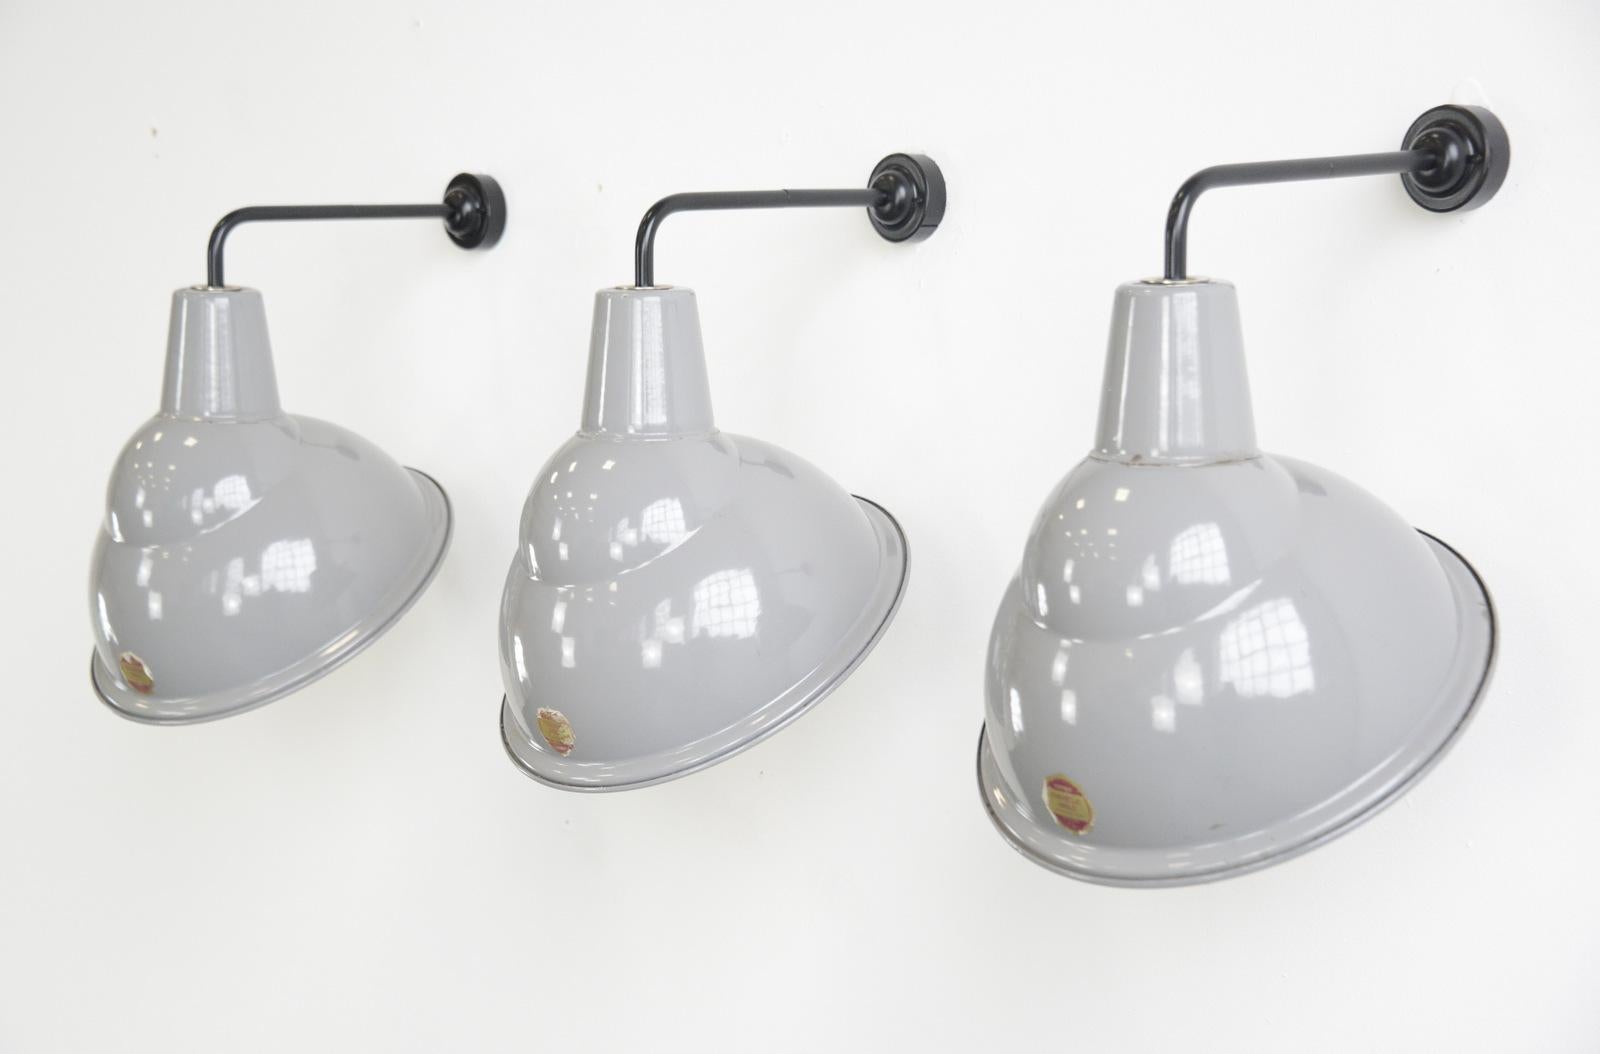 Parabolic grey enamel wall lights by Benjamin circa 1950s

- Price is per light 
- Vitreous grey enamel with white enamel inners
- Takes e27 fitting bulbs
- Wires directly into the wall
- English ~ 1950s
- 33cm wide x 45cm tall x 35cm